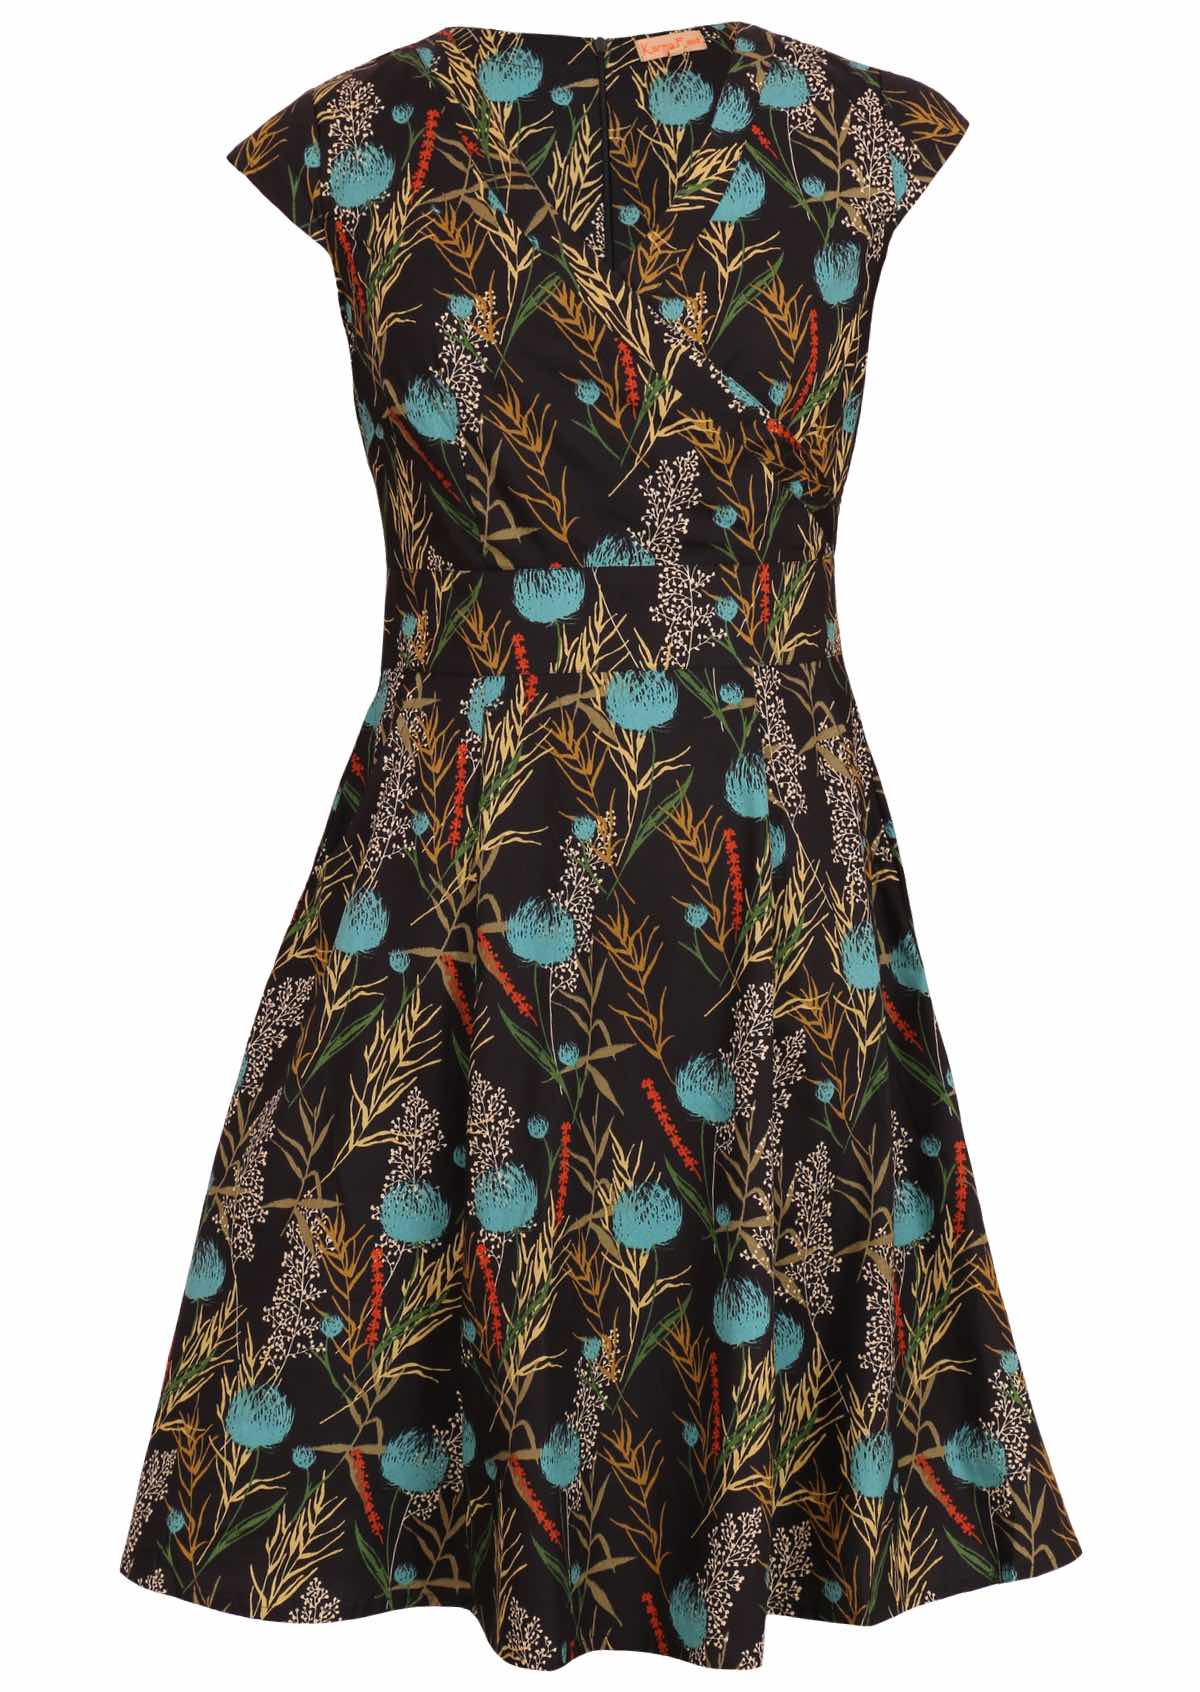 Alice Dress Thistle black and teal cotton front mannequin pic